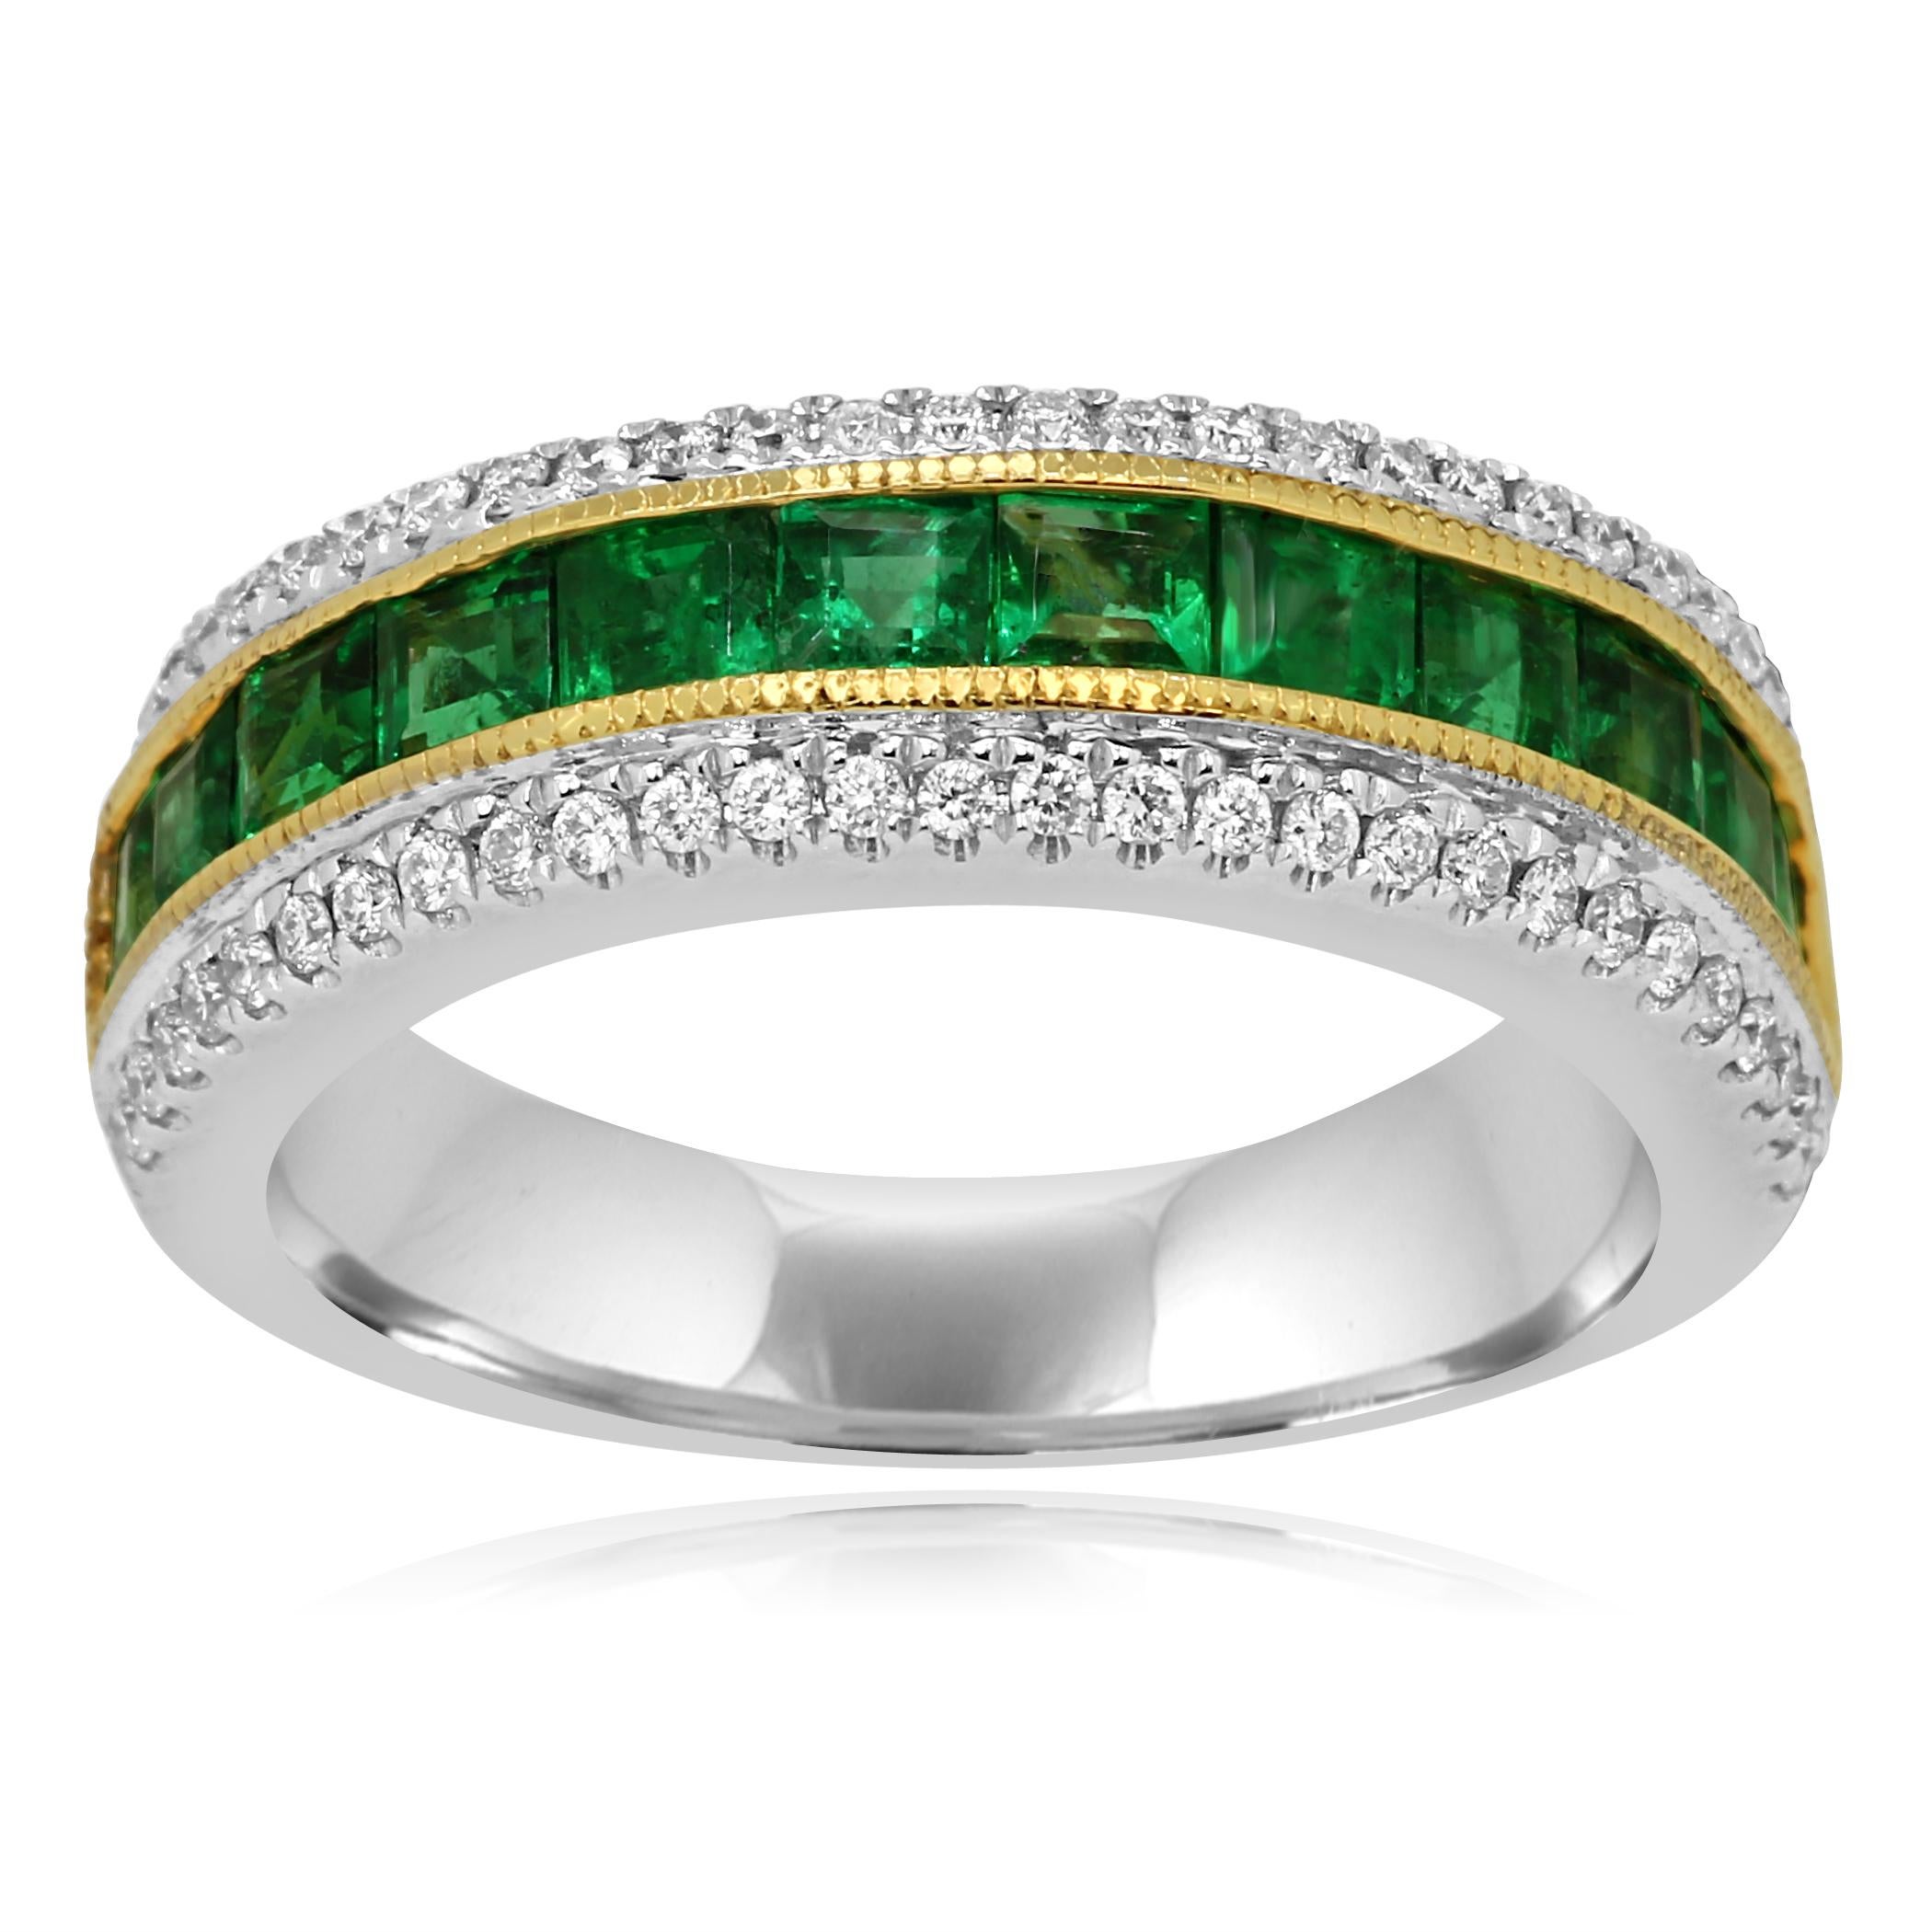 Emerald Princess 1.38 Carat Flanked with Row of White Round Diamond on the sides 0.24 Carat in 14K White and Yellow Gold Stunning Channel Set Cocktail Fashion Band Ring. Total Weight 1.62 Carat

Emerald Weight 1.38 Carat
Diamond Weight 0.24 Carat